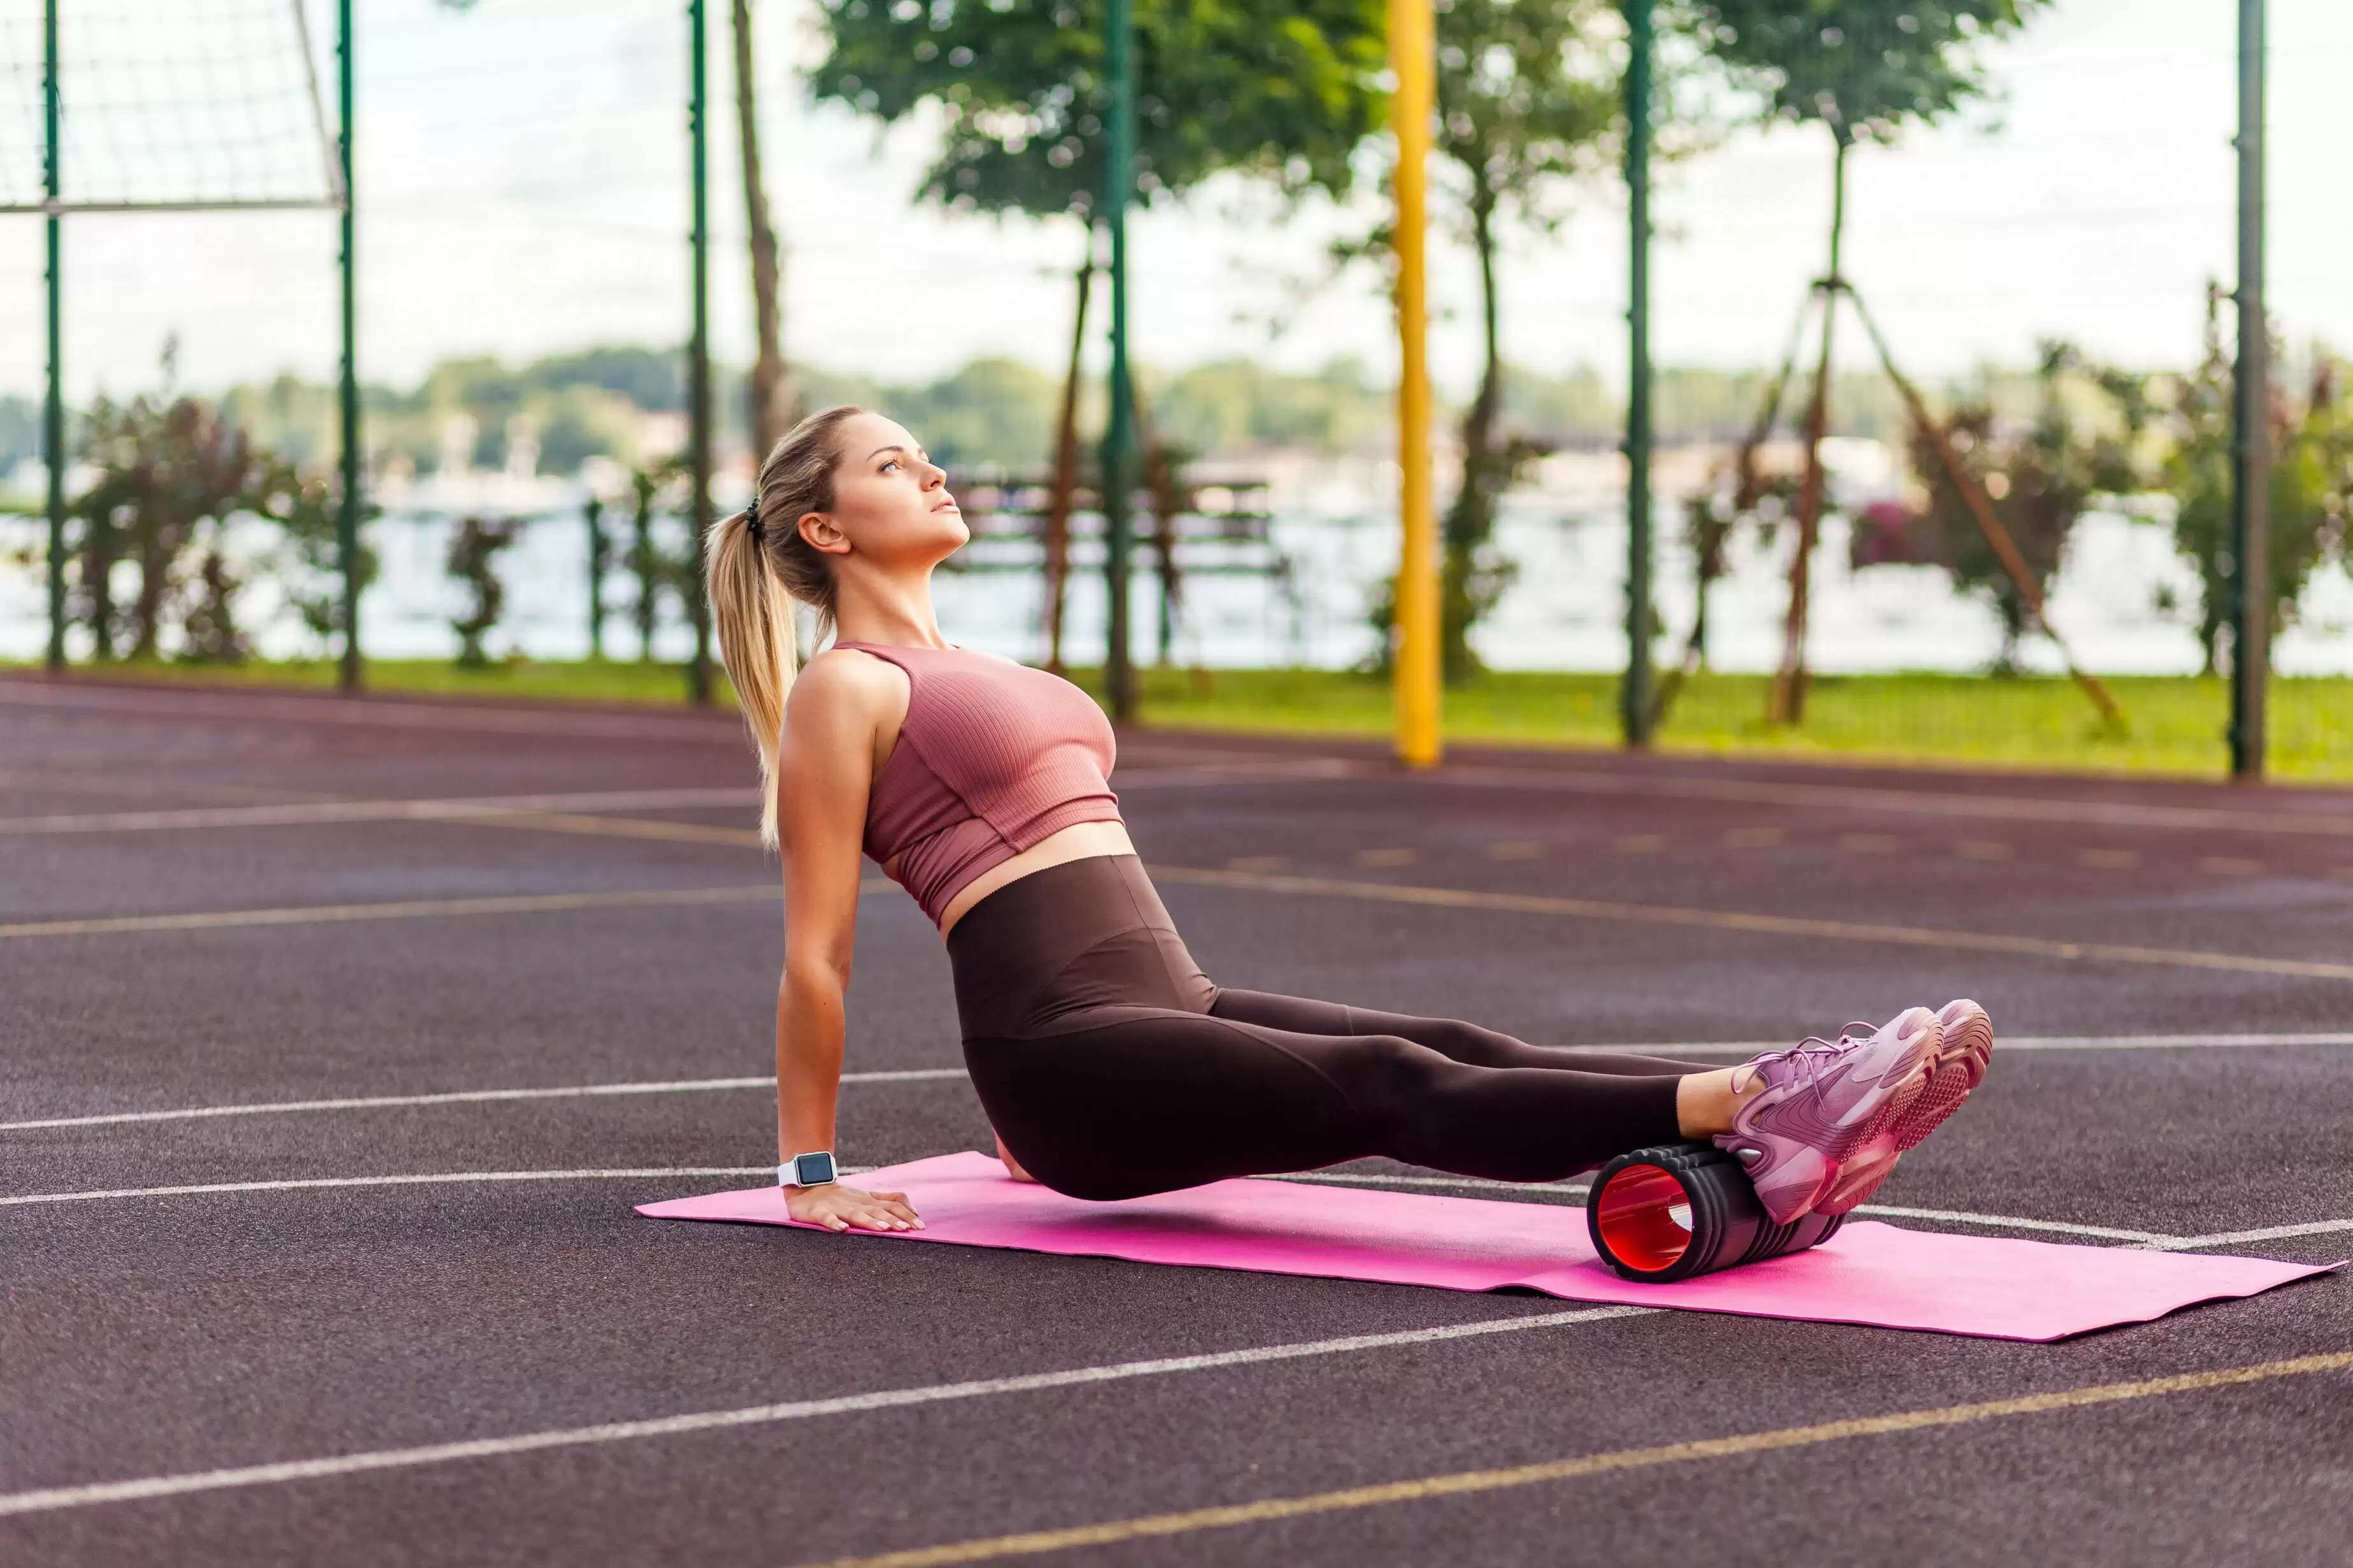 Foam rolling: Benefits, safety and all you need to know